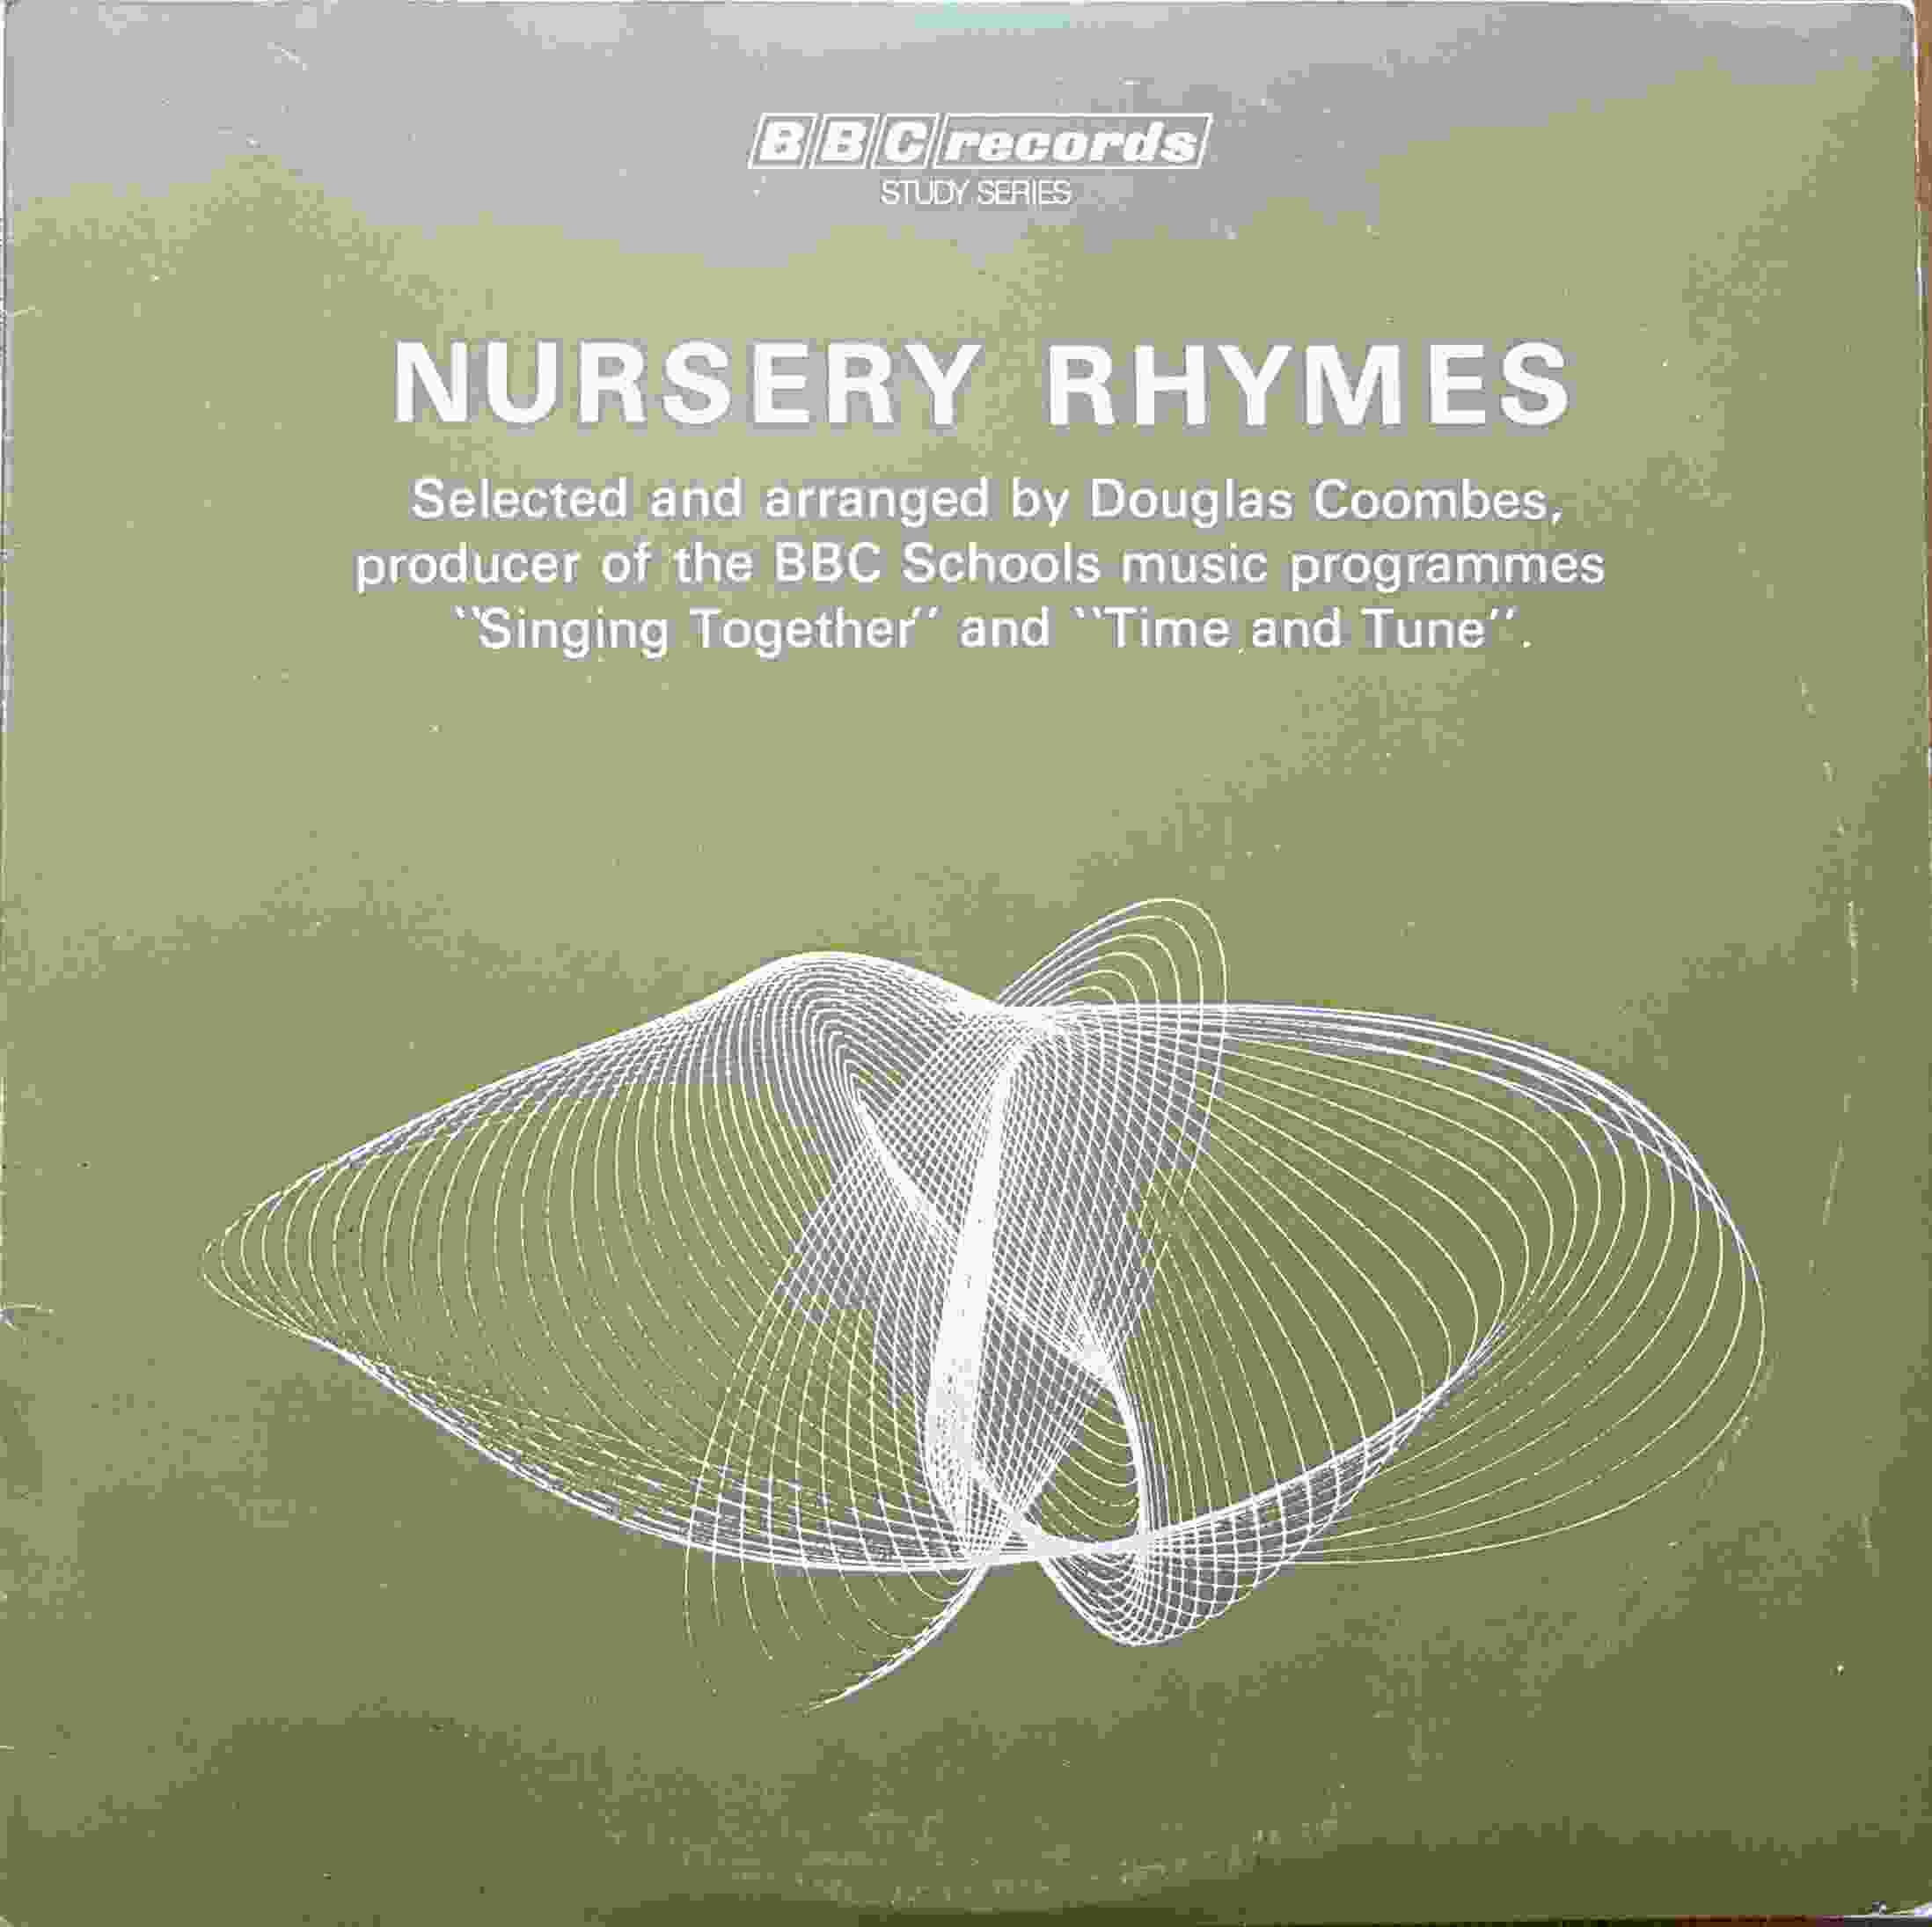 Picture of RESR 26 Nursery rhymes by artist Douglas Coombes from the BBC albums - Records and Tapes library